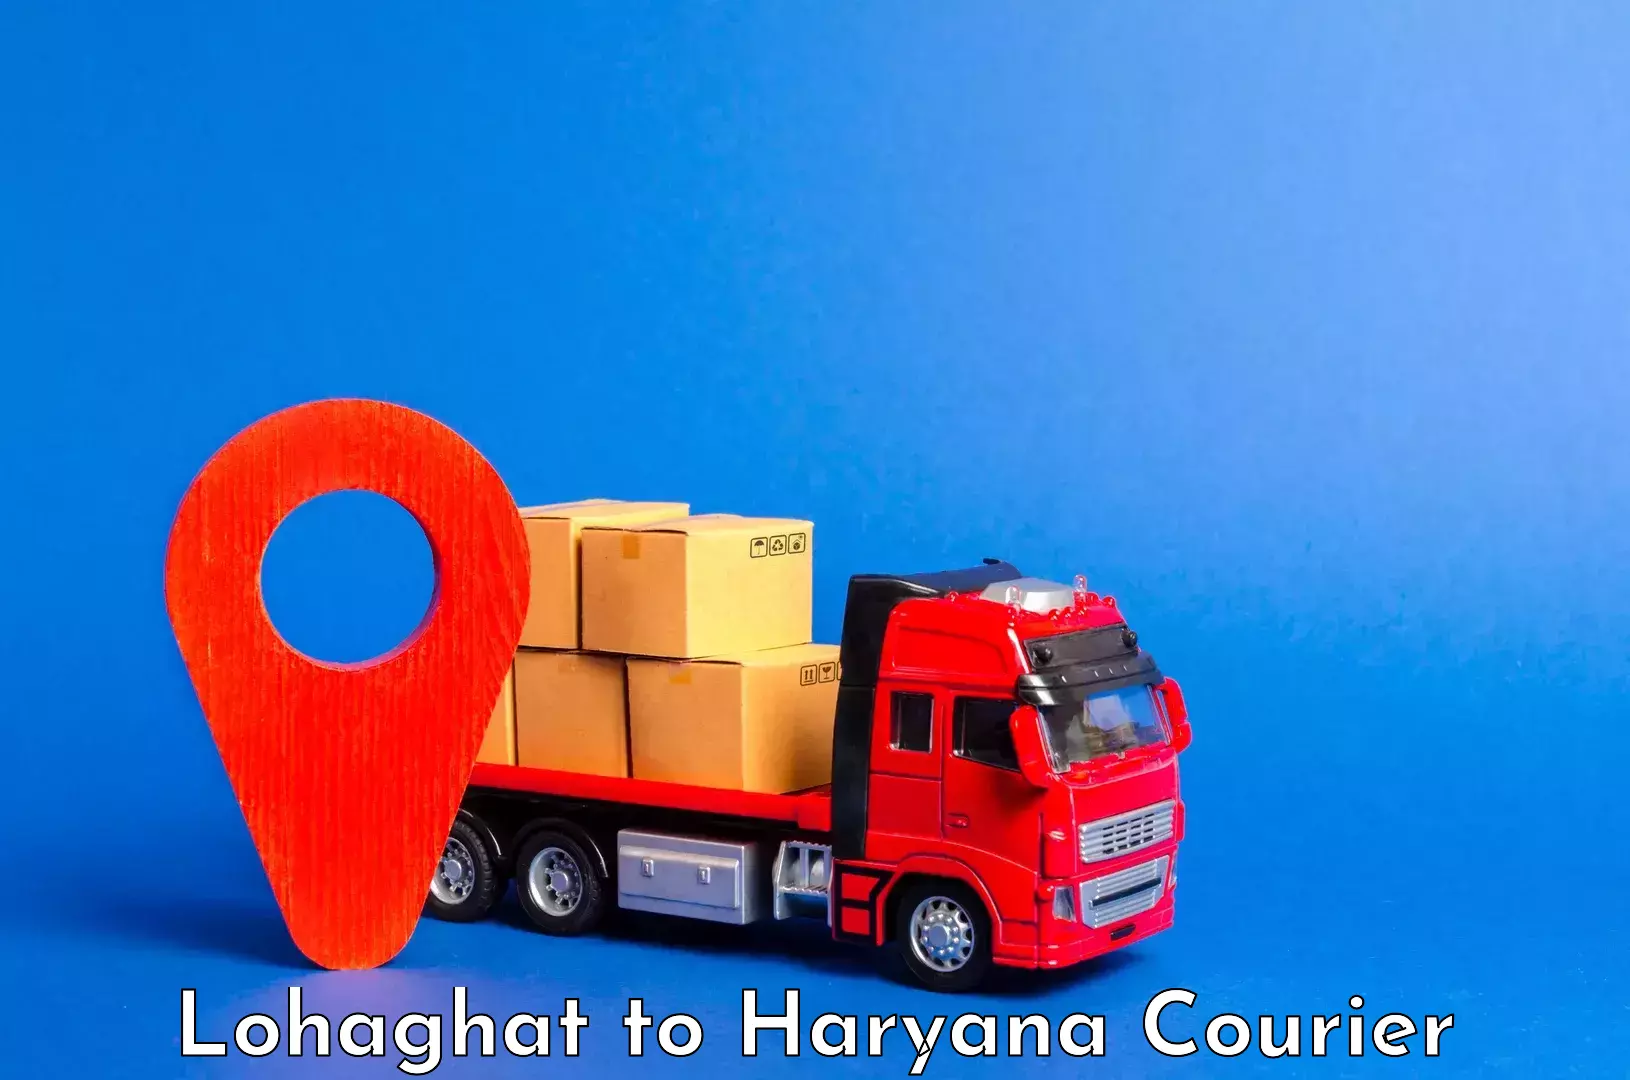 Luggage delivery optimization Lohaghat to NCR Haryana